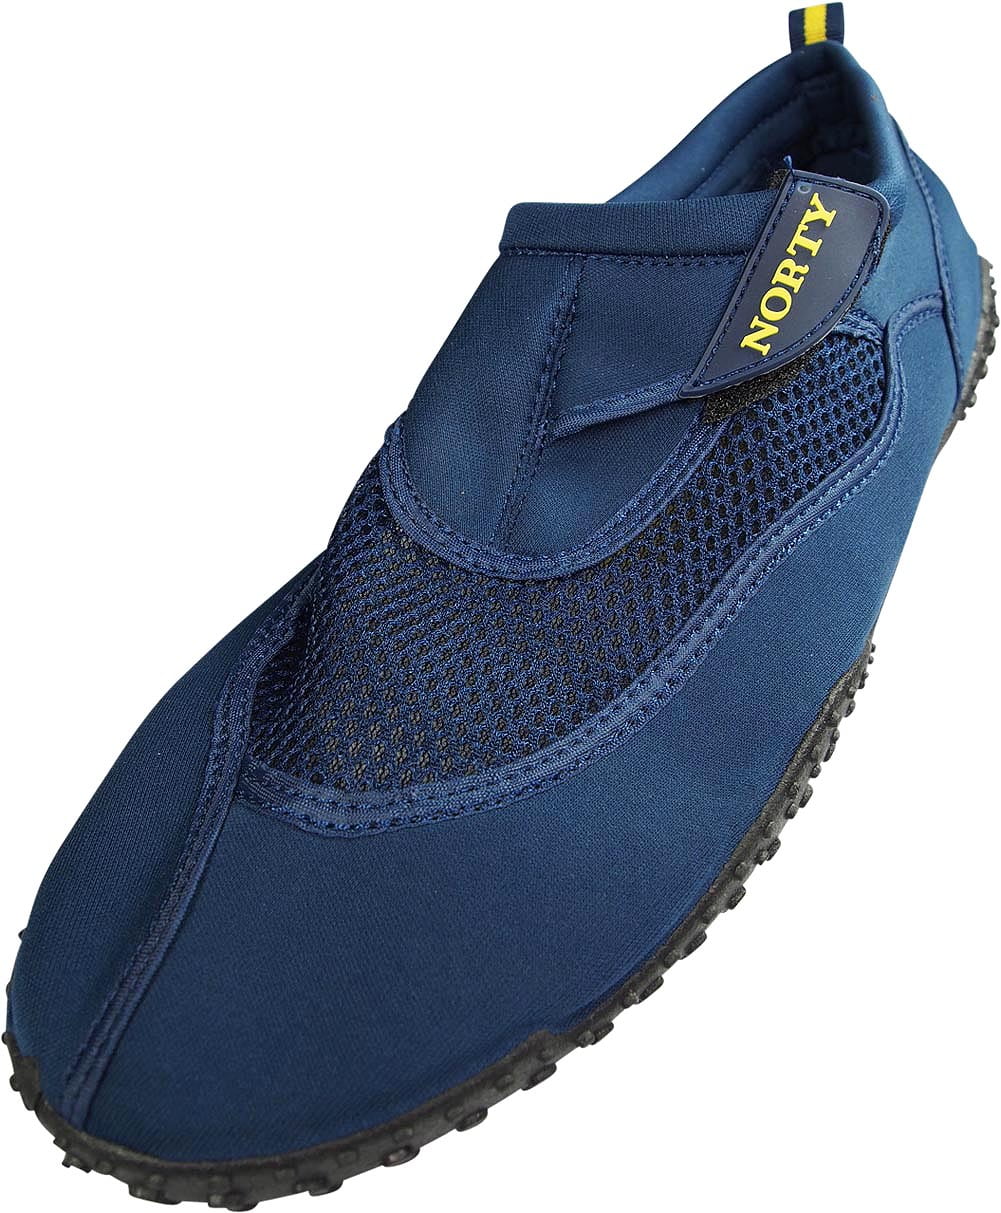 water shoes for big feet